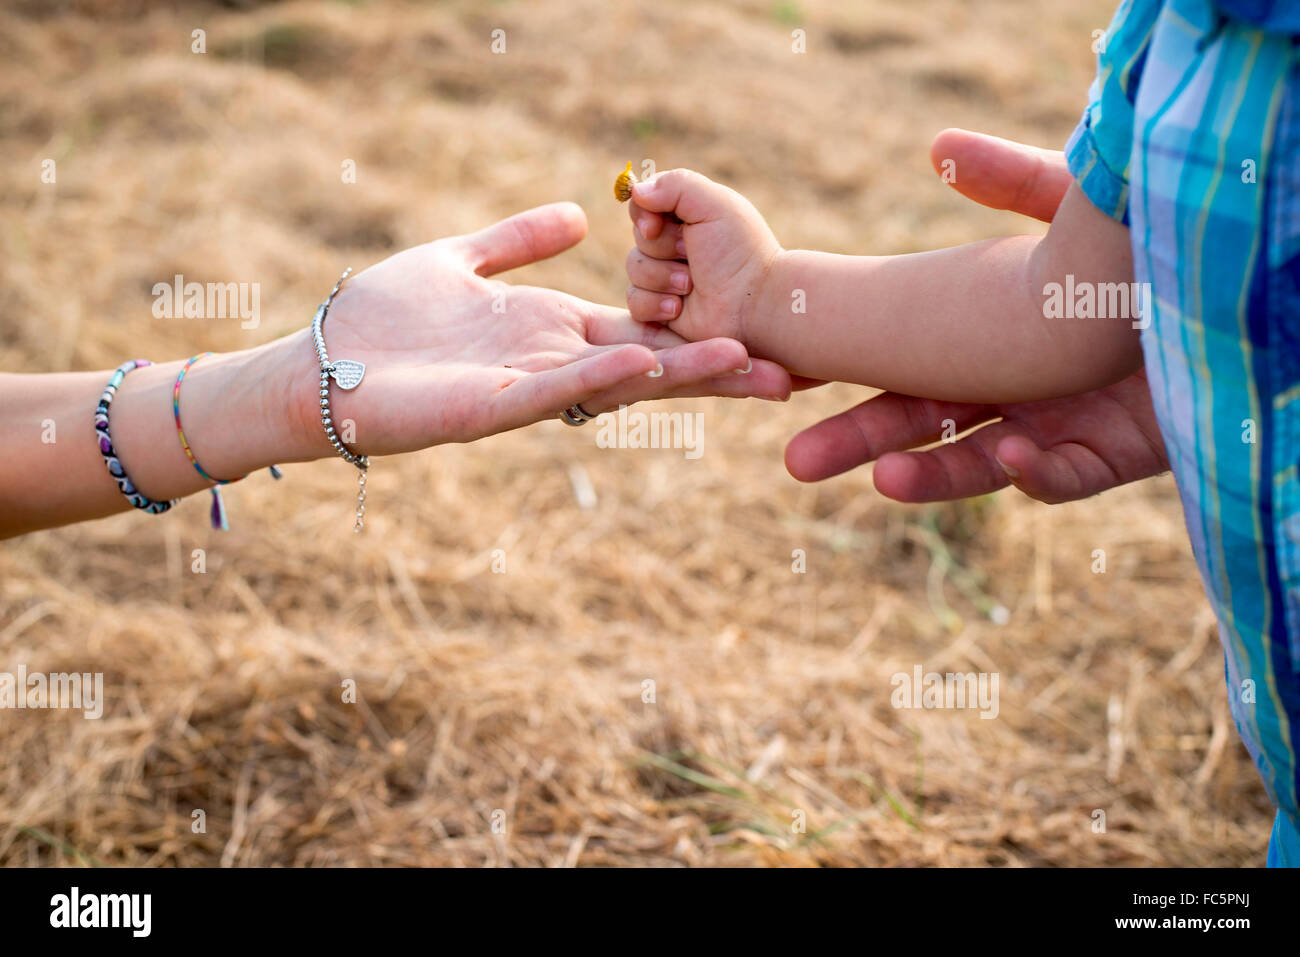 Parent Reaching For Child's Hand in Field Stock Photo